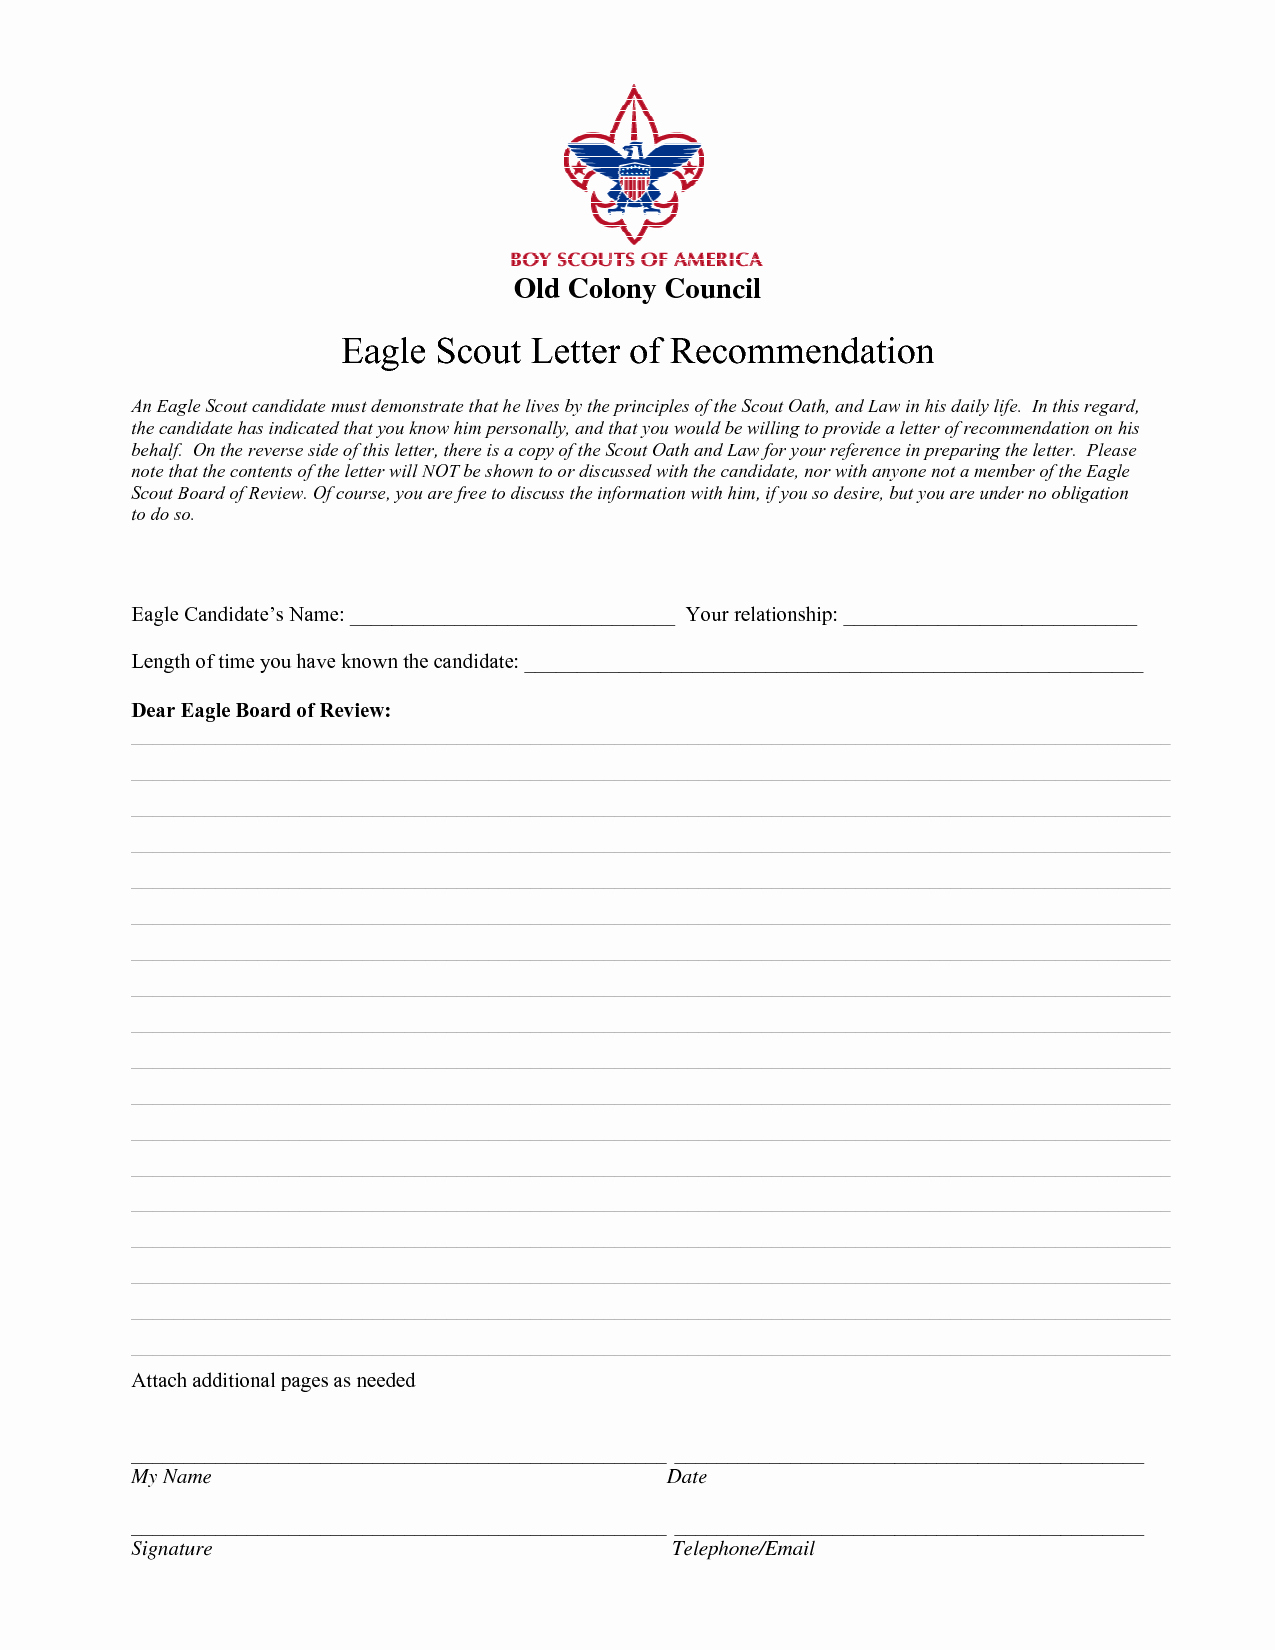 Eagle Letter Of Ambition Beautiful Eagle Scout Letter Re Mendation Sample From